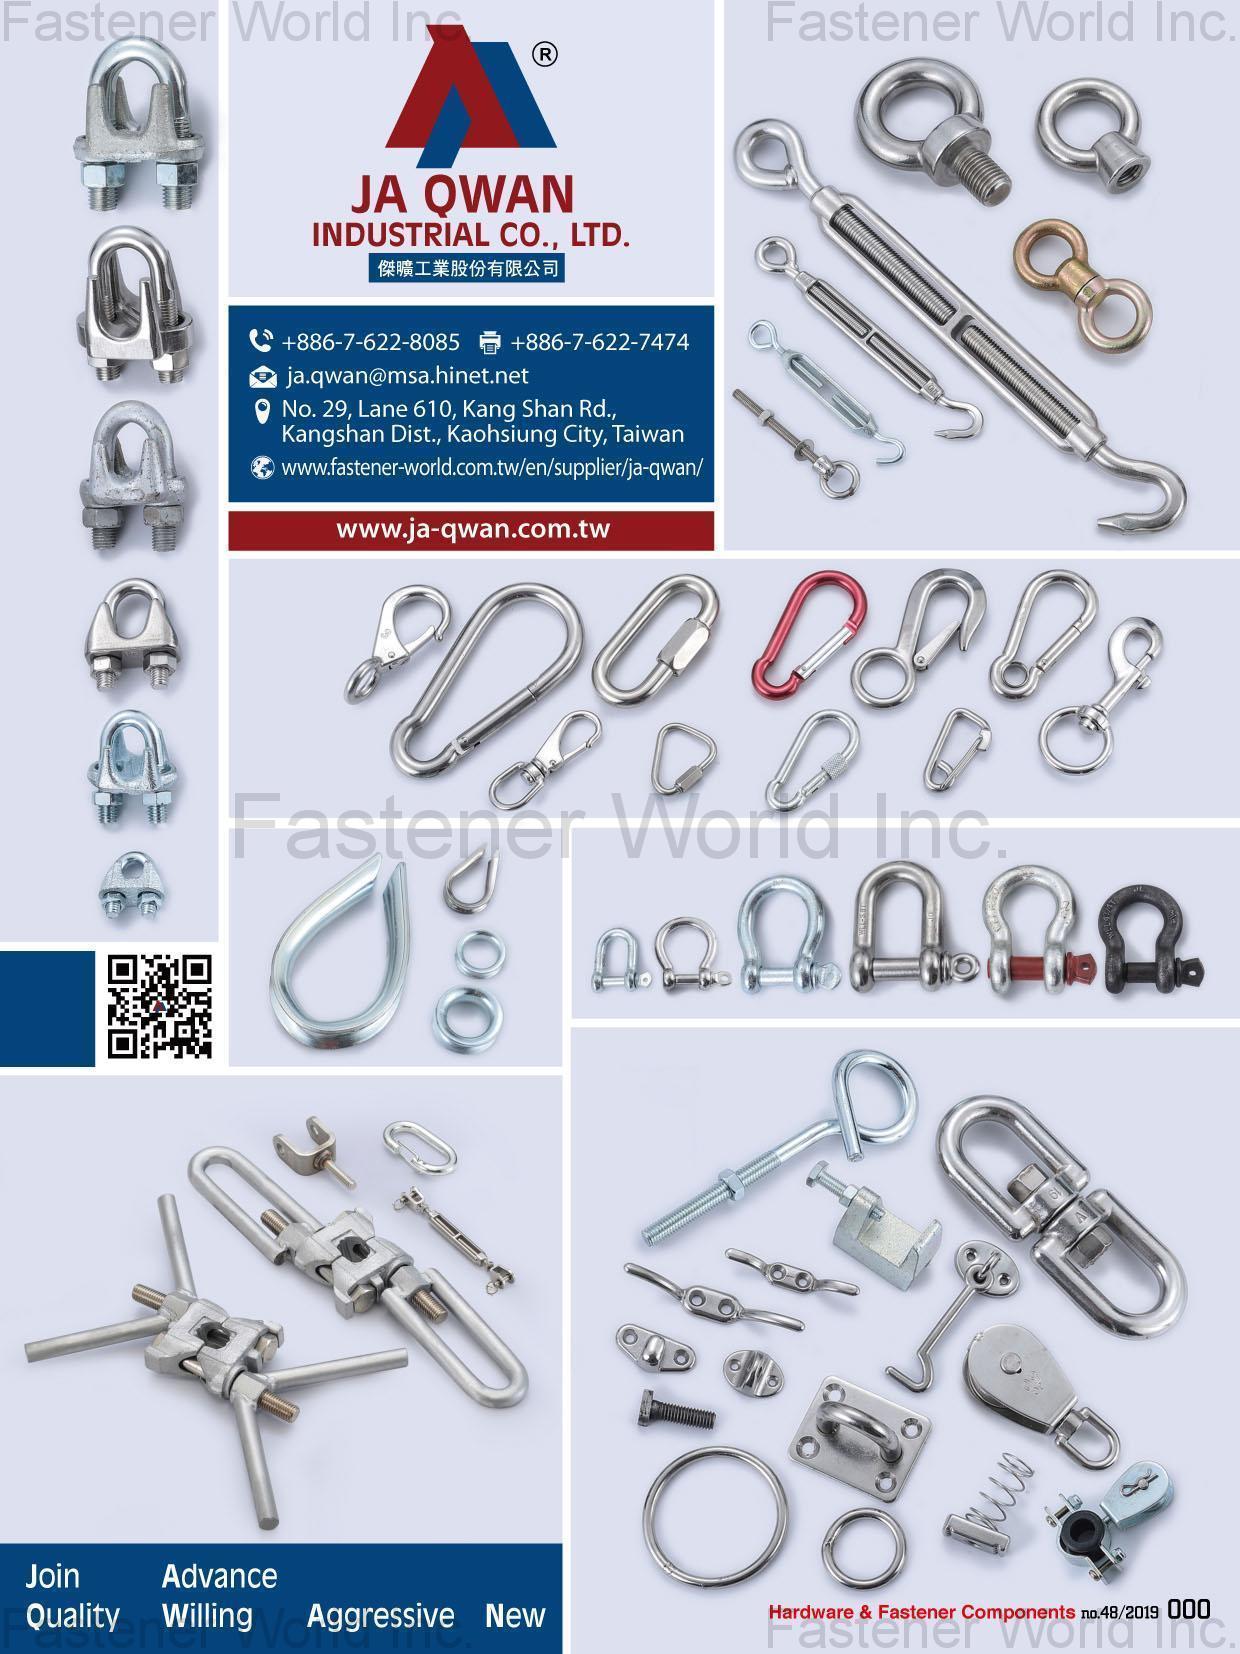 JA QWAN INDUSTRIAL CO., LTD. , Wire Rope Clip, Turnbuckle, Shackle, Thimble, Spring Nuts , Carabiners